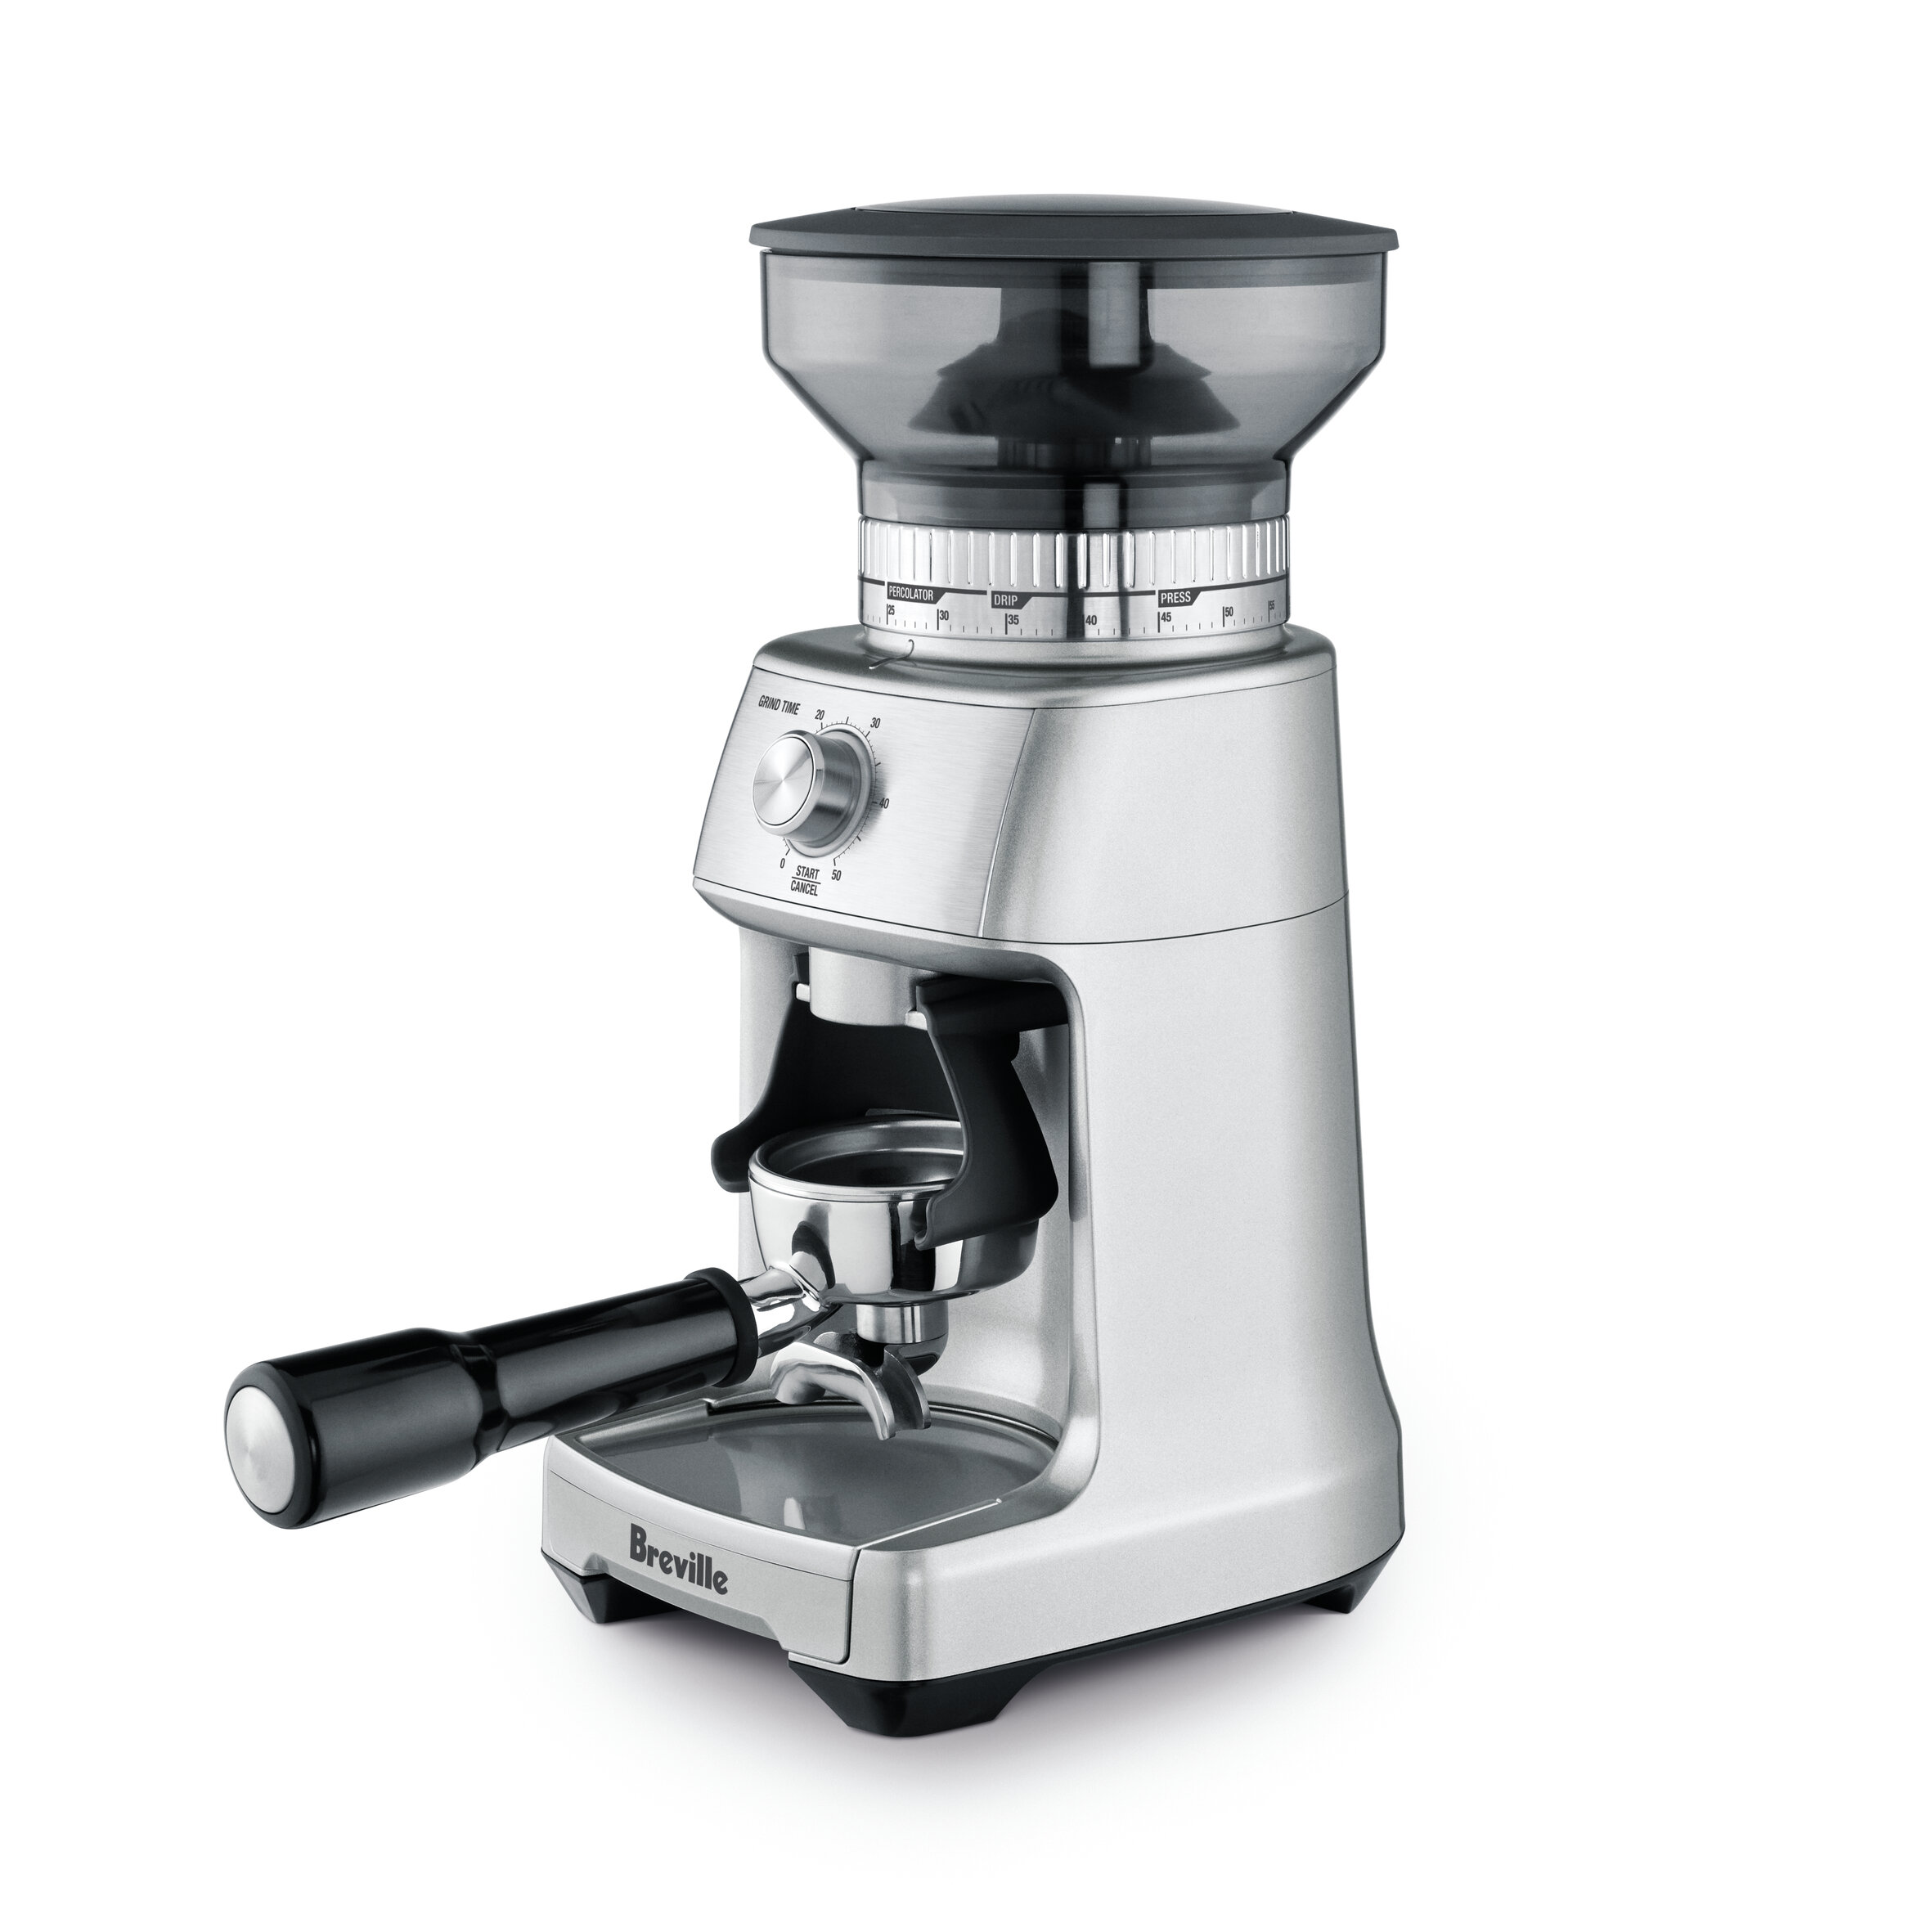 Breville Electric Burr Coffee Grinder & Reviews